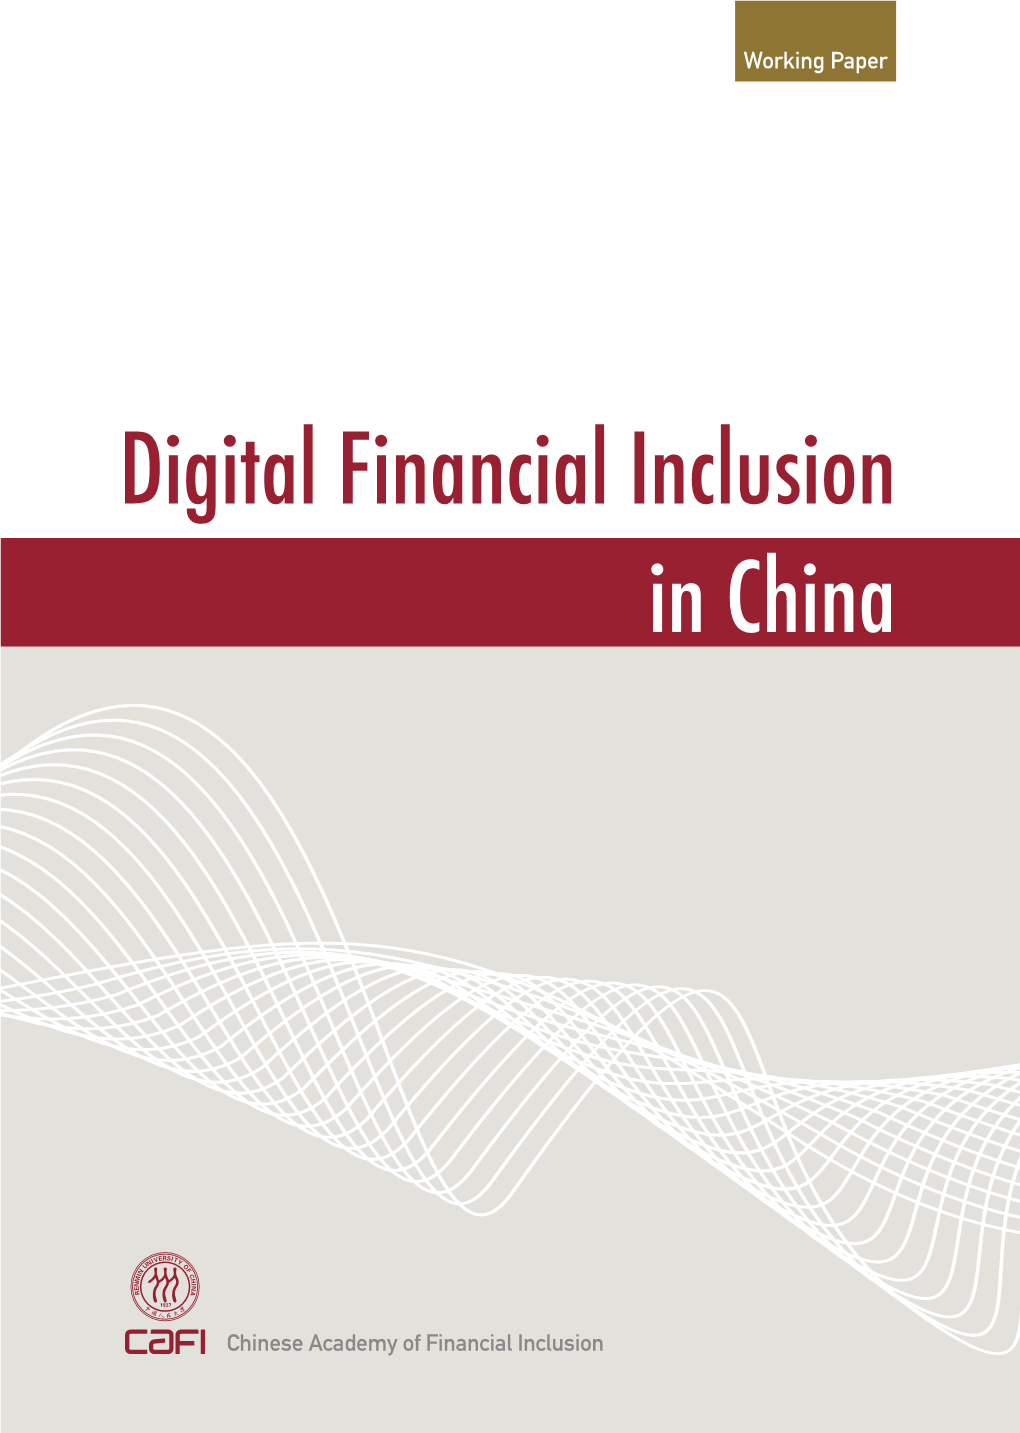 Digital Financial Inclusion in China